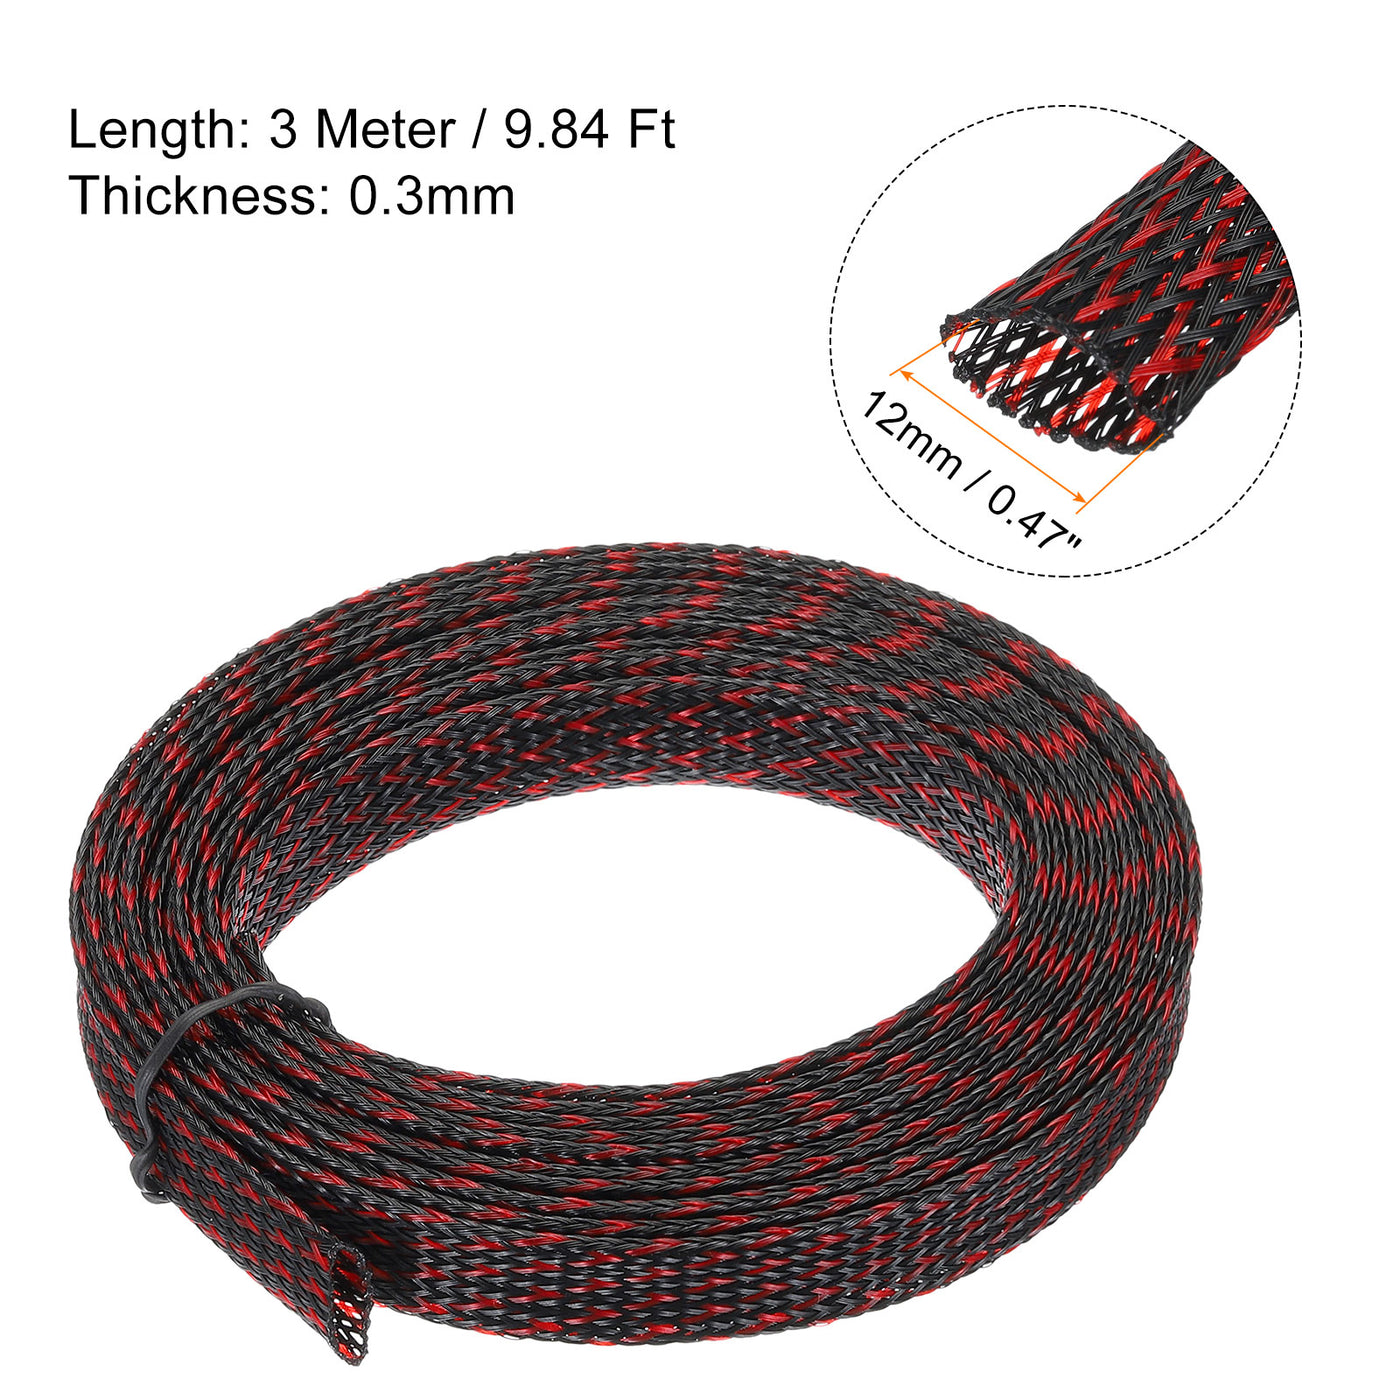 uxcell Uxcell Insulation Braid Sleeving, 9.84 Ft-12mm High Temperature Sleeve Black Red